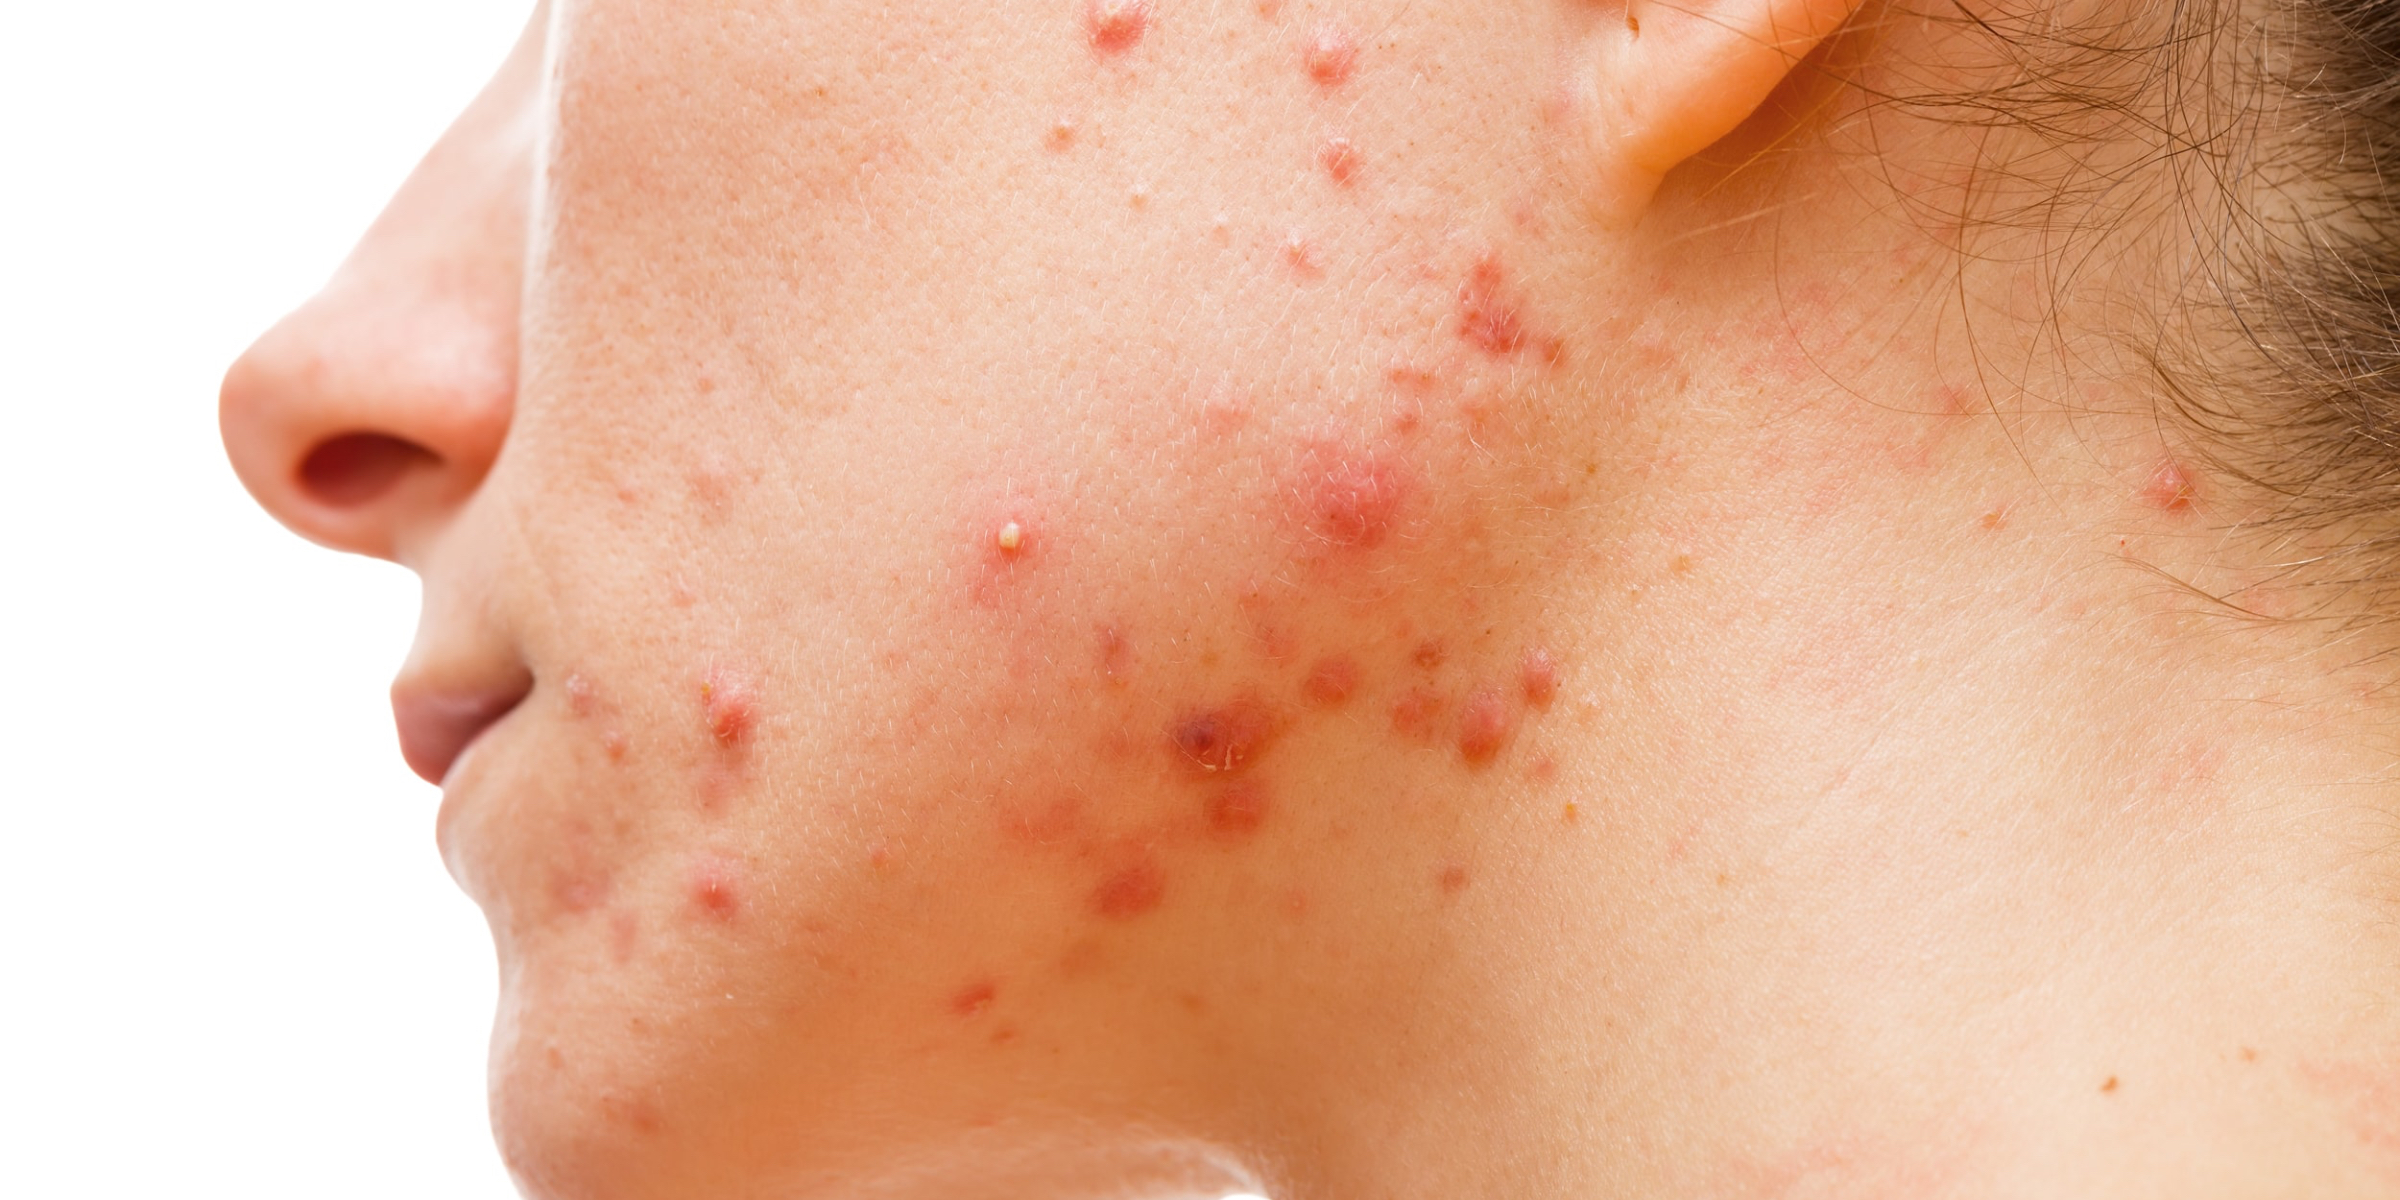 Close-up on acne and acne scarring